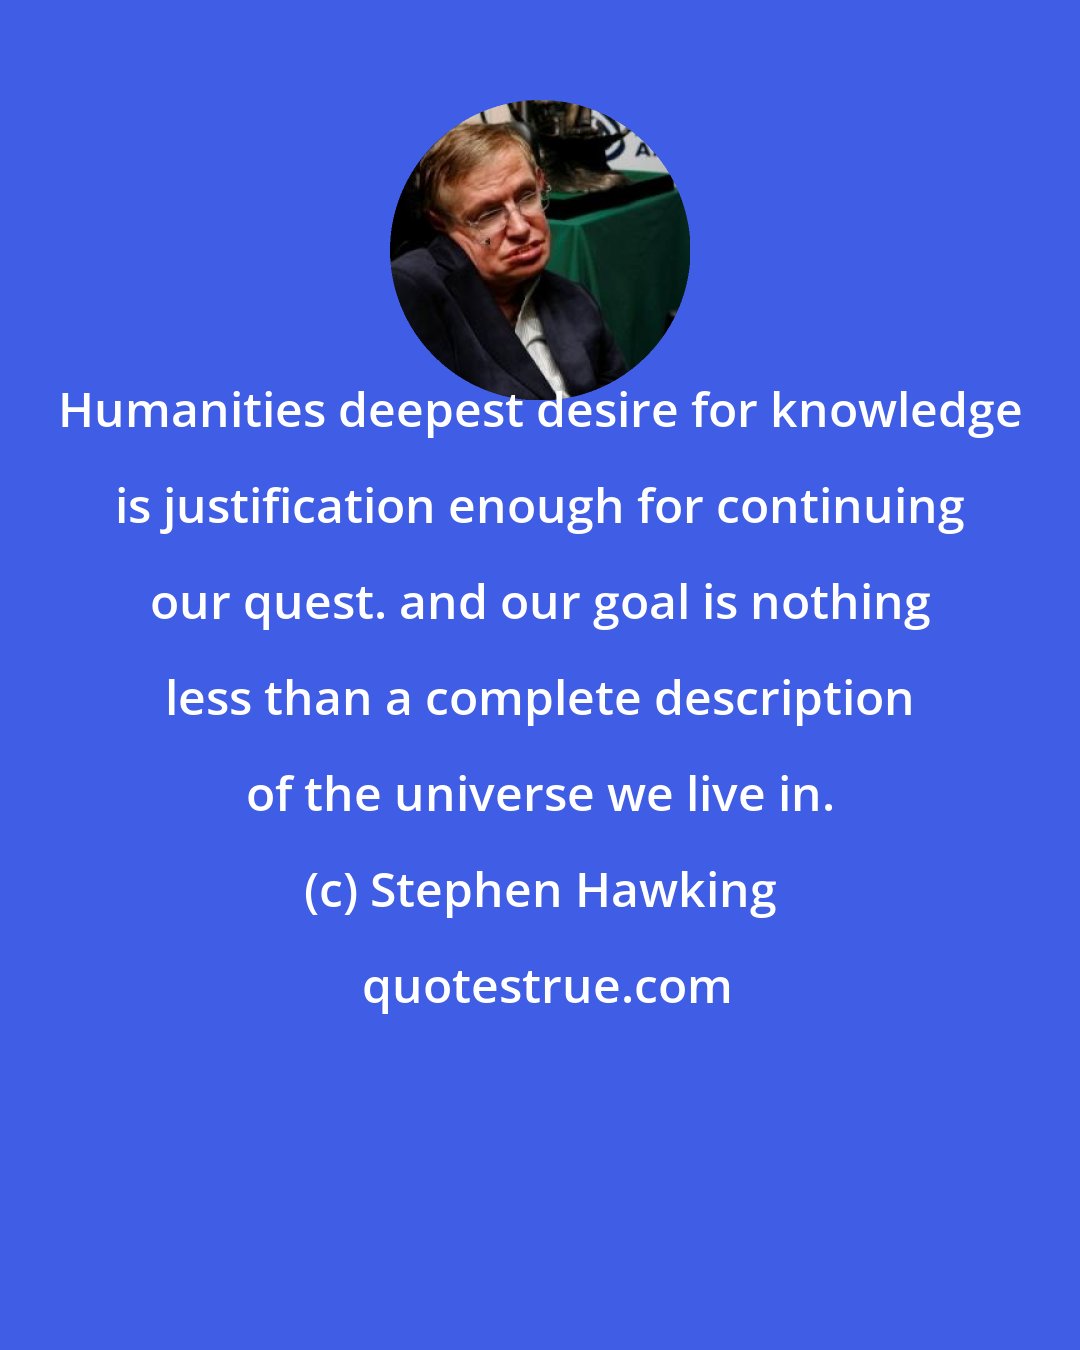 Stephen Hawking: Humanities deepest desire for knowledge is justification enough for continuing our quest. and our goal is nothing less than a complete description of the universe we live in.